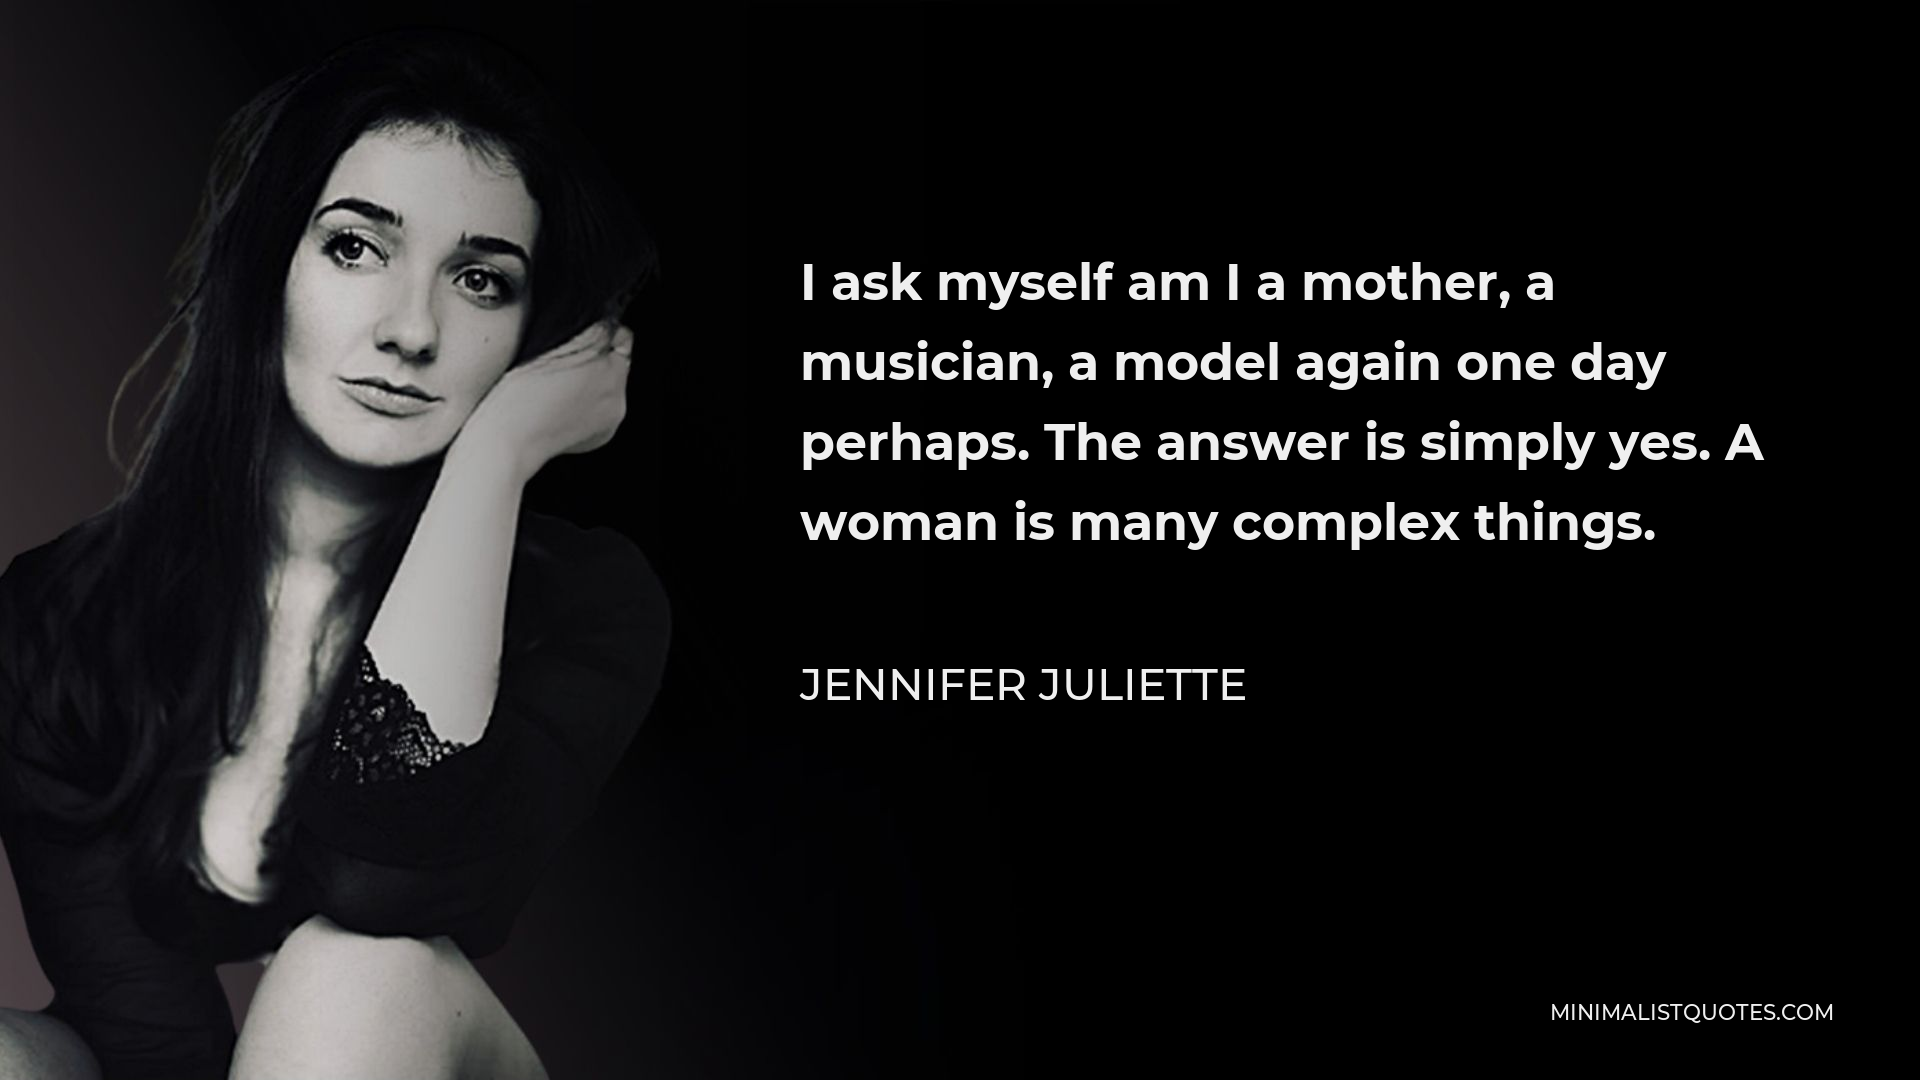 Jennifer Juliette Quote - I ask myself am I a mother, a musician, a model again one day perhaps. The answer is simply yes. A woman is many complex things.